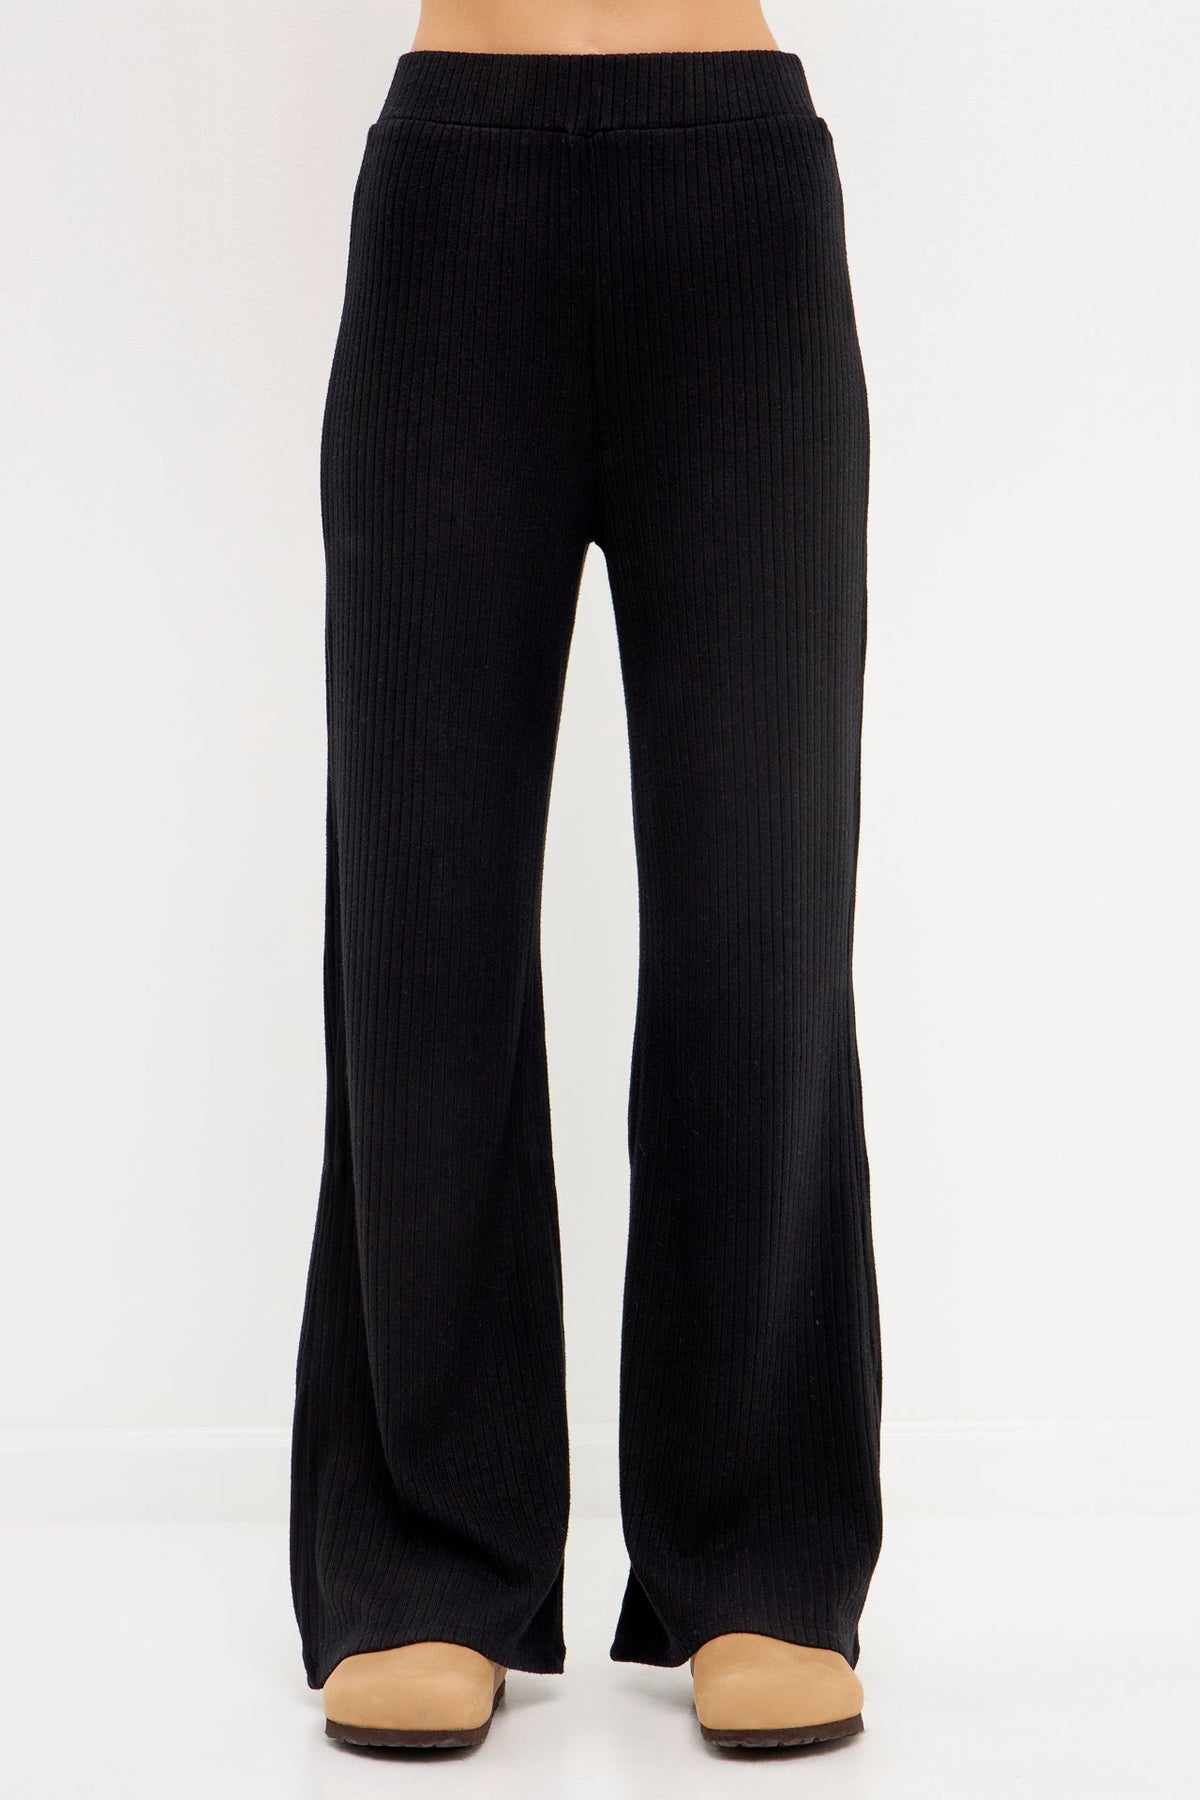 GREY LAB - Loungewear Knit Pants - PANTS available at Objectrare